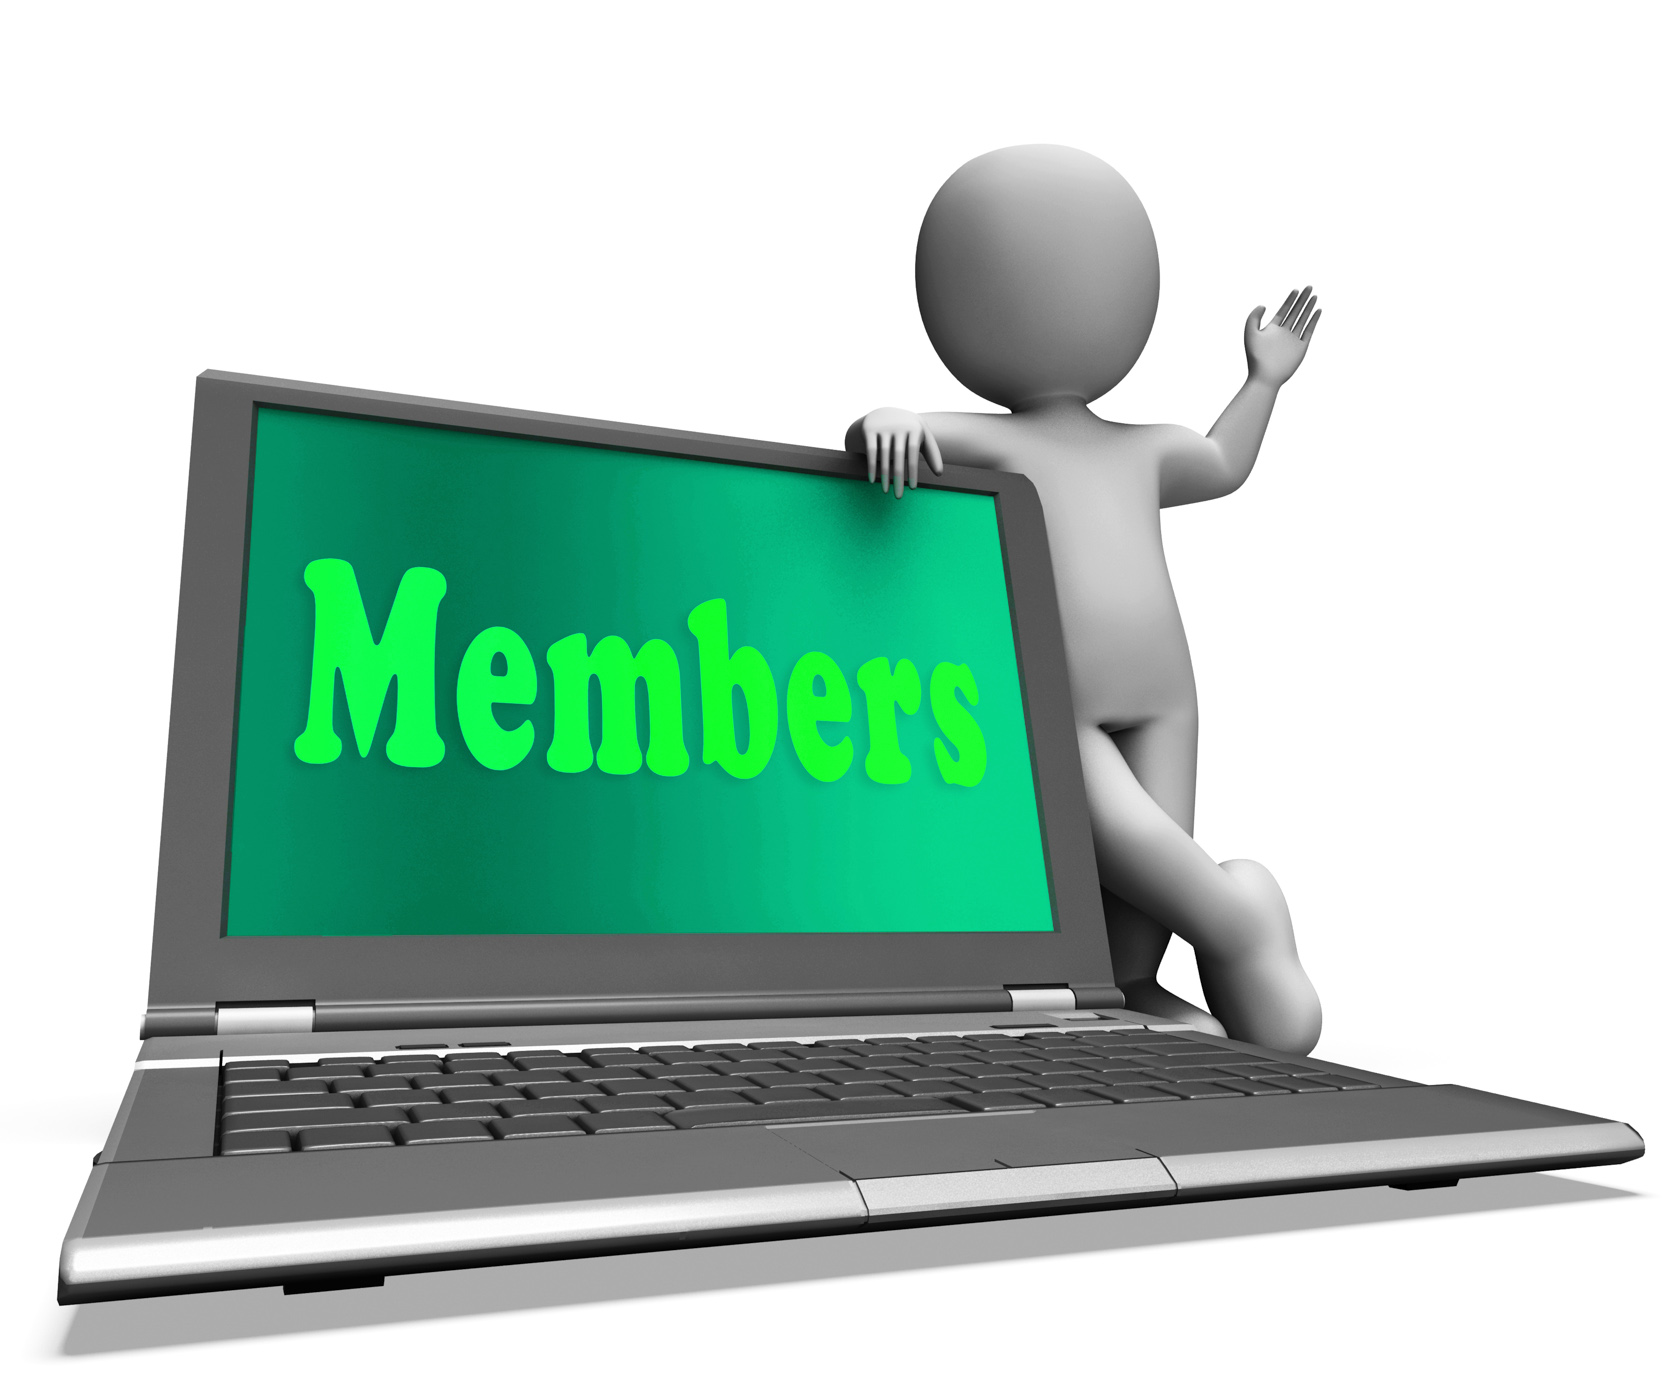 Members laptop shows membership registration and web subscribing photo